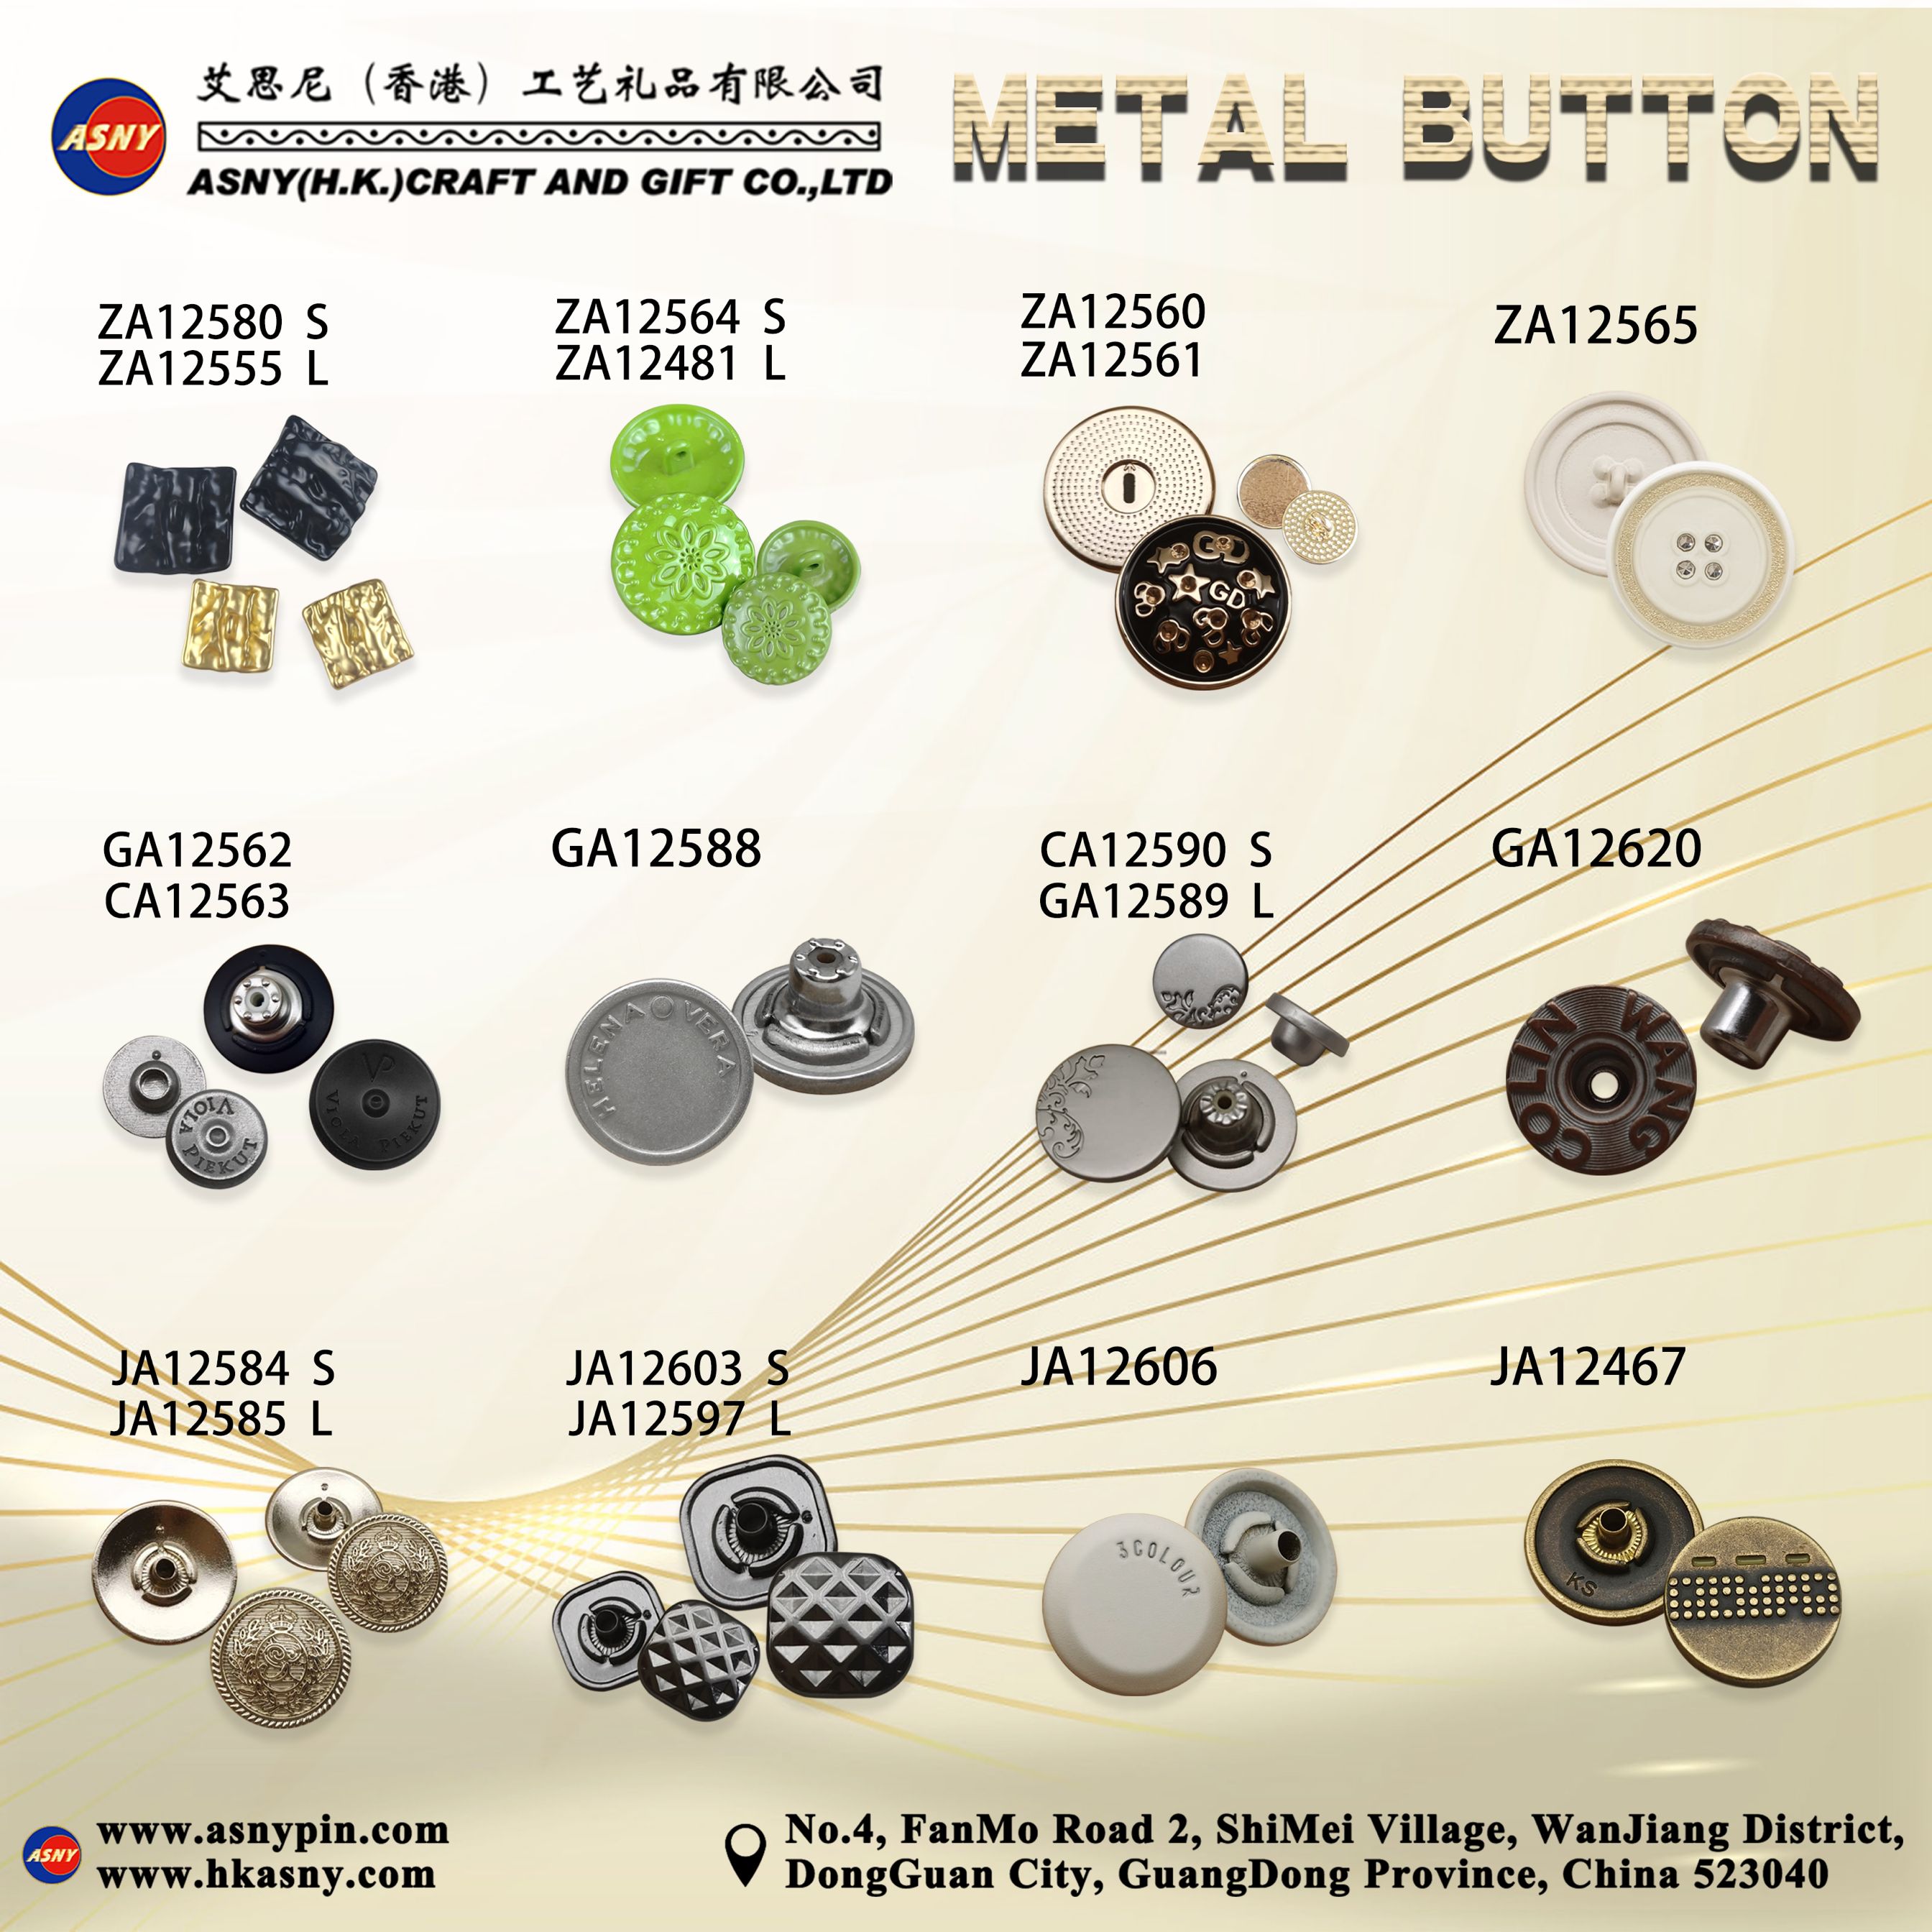 Catalog  - Accessory - Clothes/Shoes Metal Button Design/Production/Make/Supply/Factory (5)